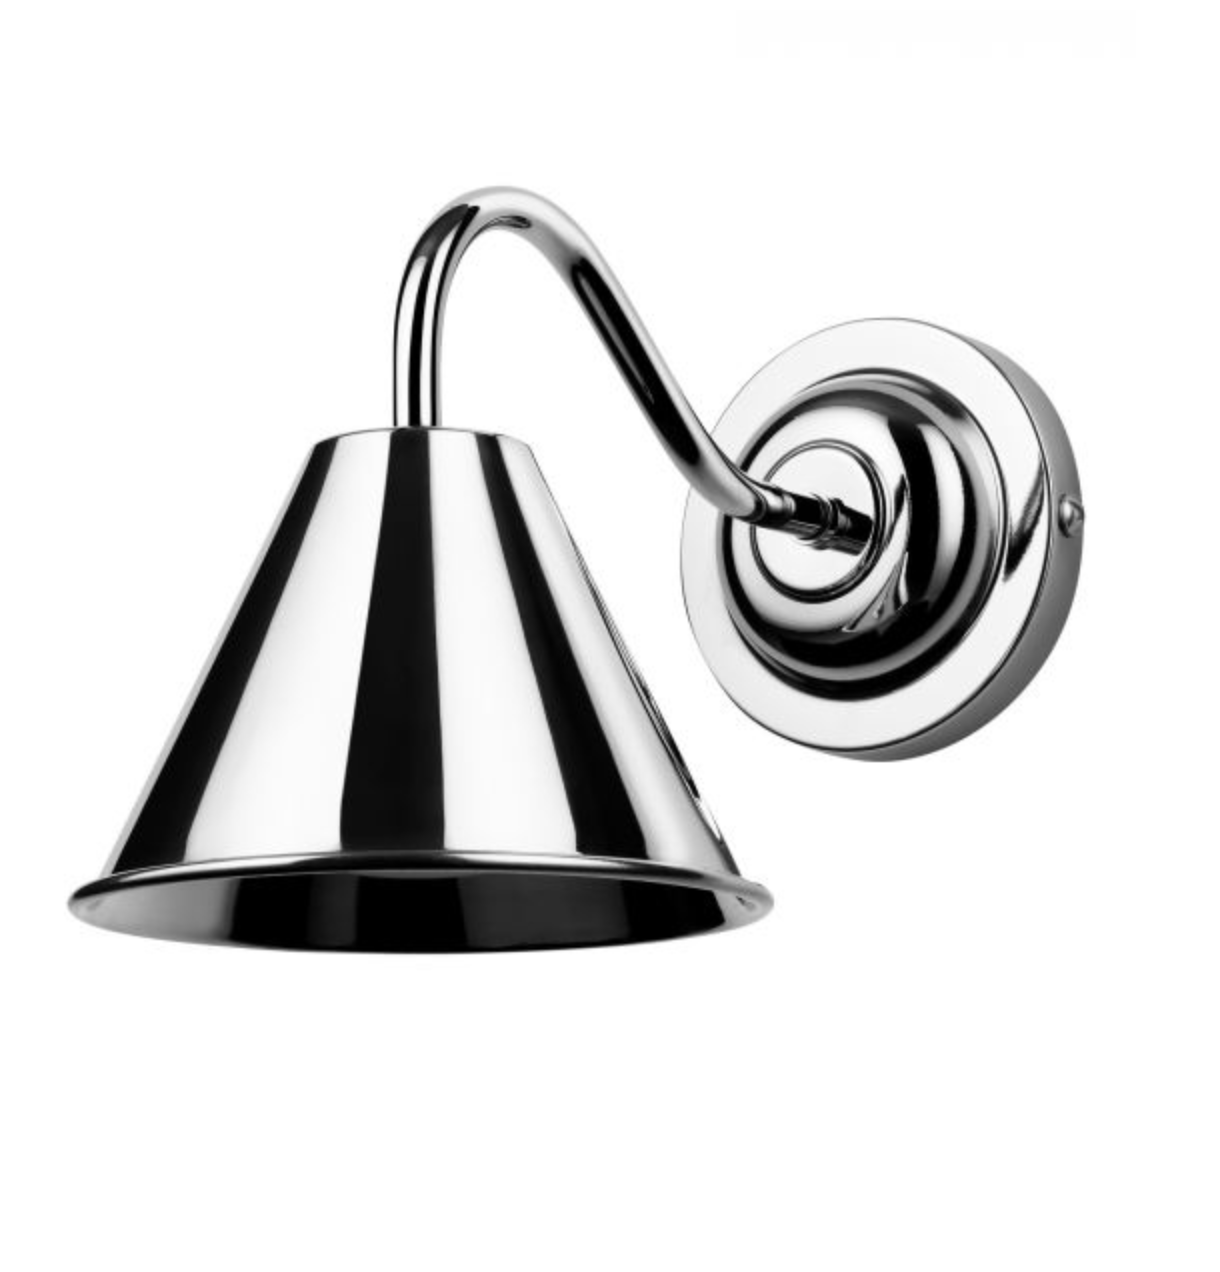 AVO Solid Brass Bathroom Wall Light In Polished Chrome Finish - ID 11191